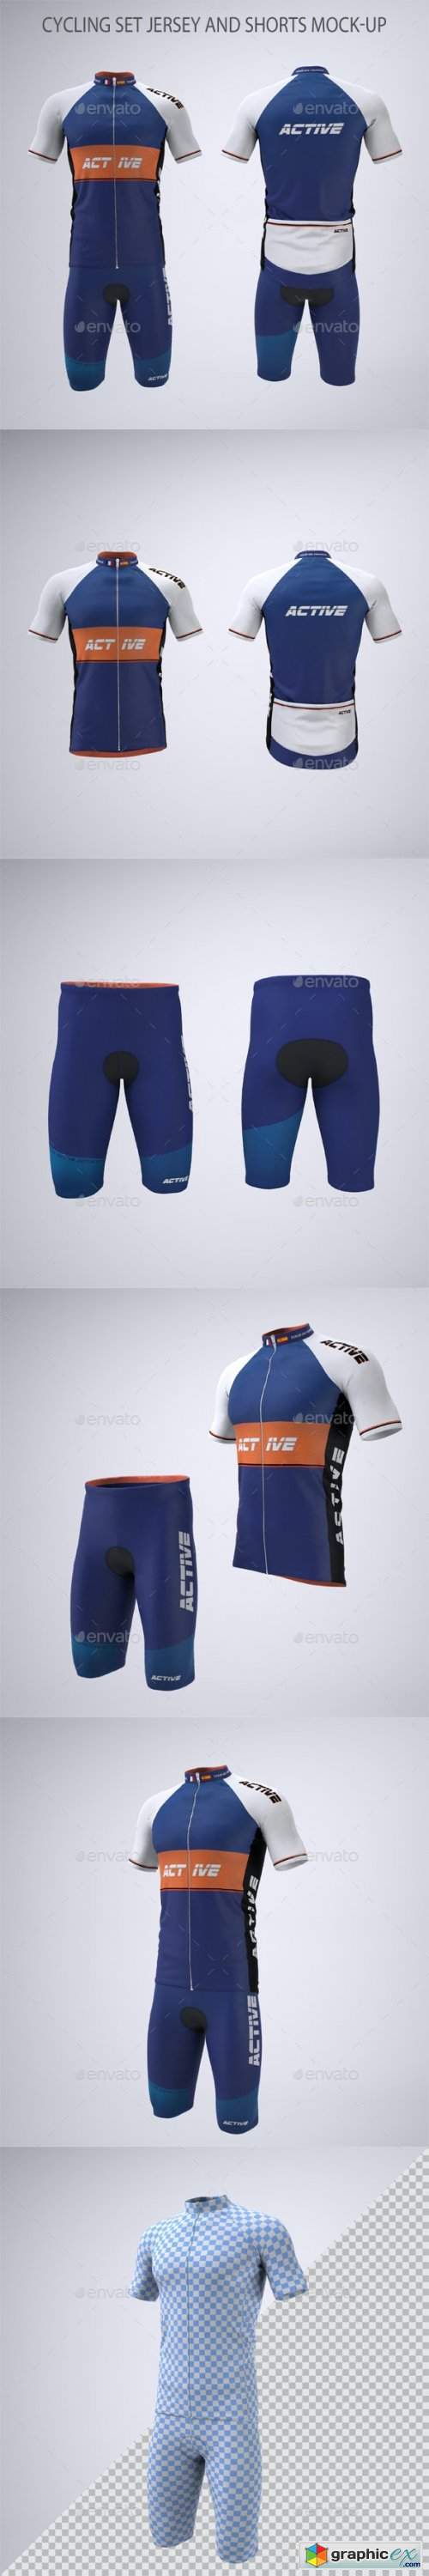 Download Cycling Set Jersey and Shorts Mock-up » Free Download Vector Stock Image Photoshop Icon